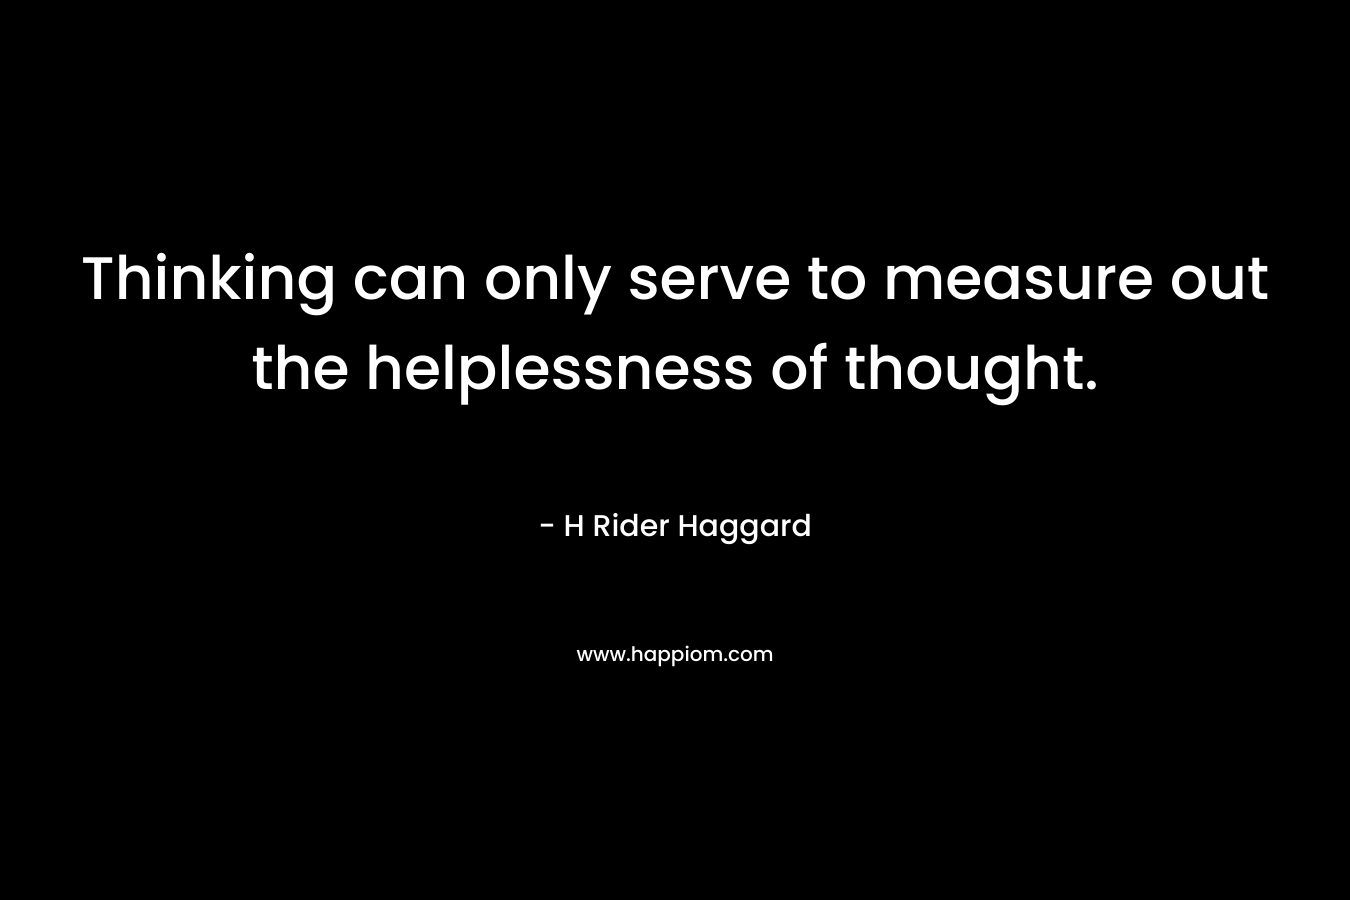 Thinking can only serve to measure out the helplessness of thought. – H Rider Haggard